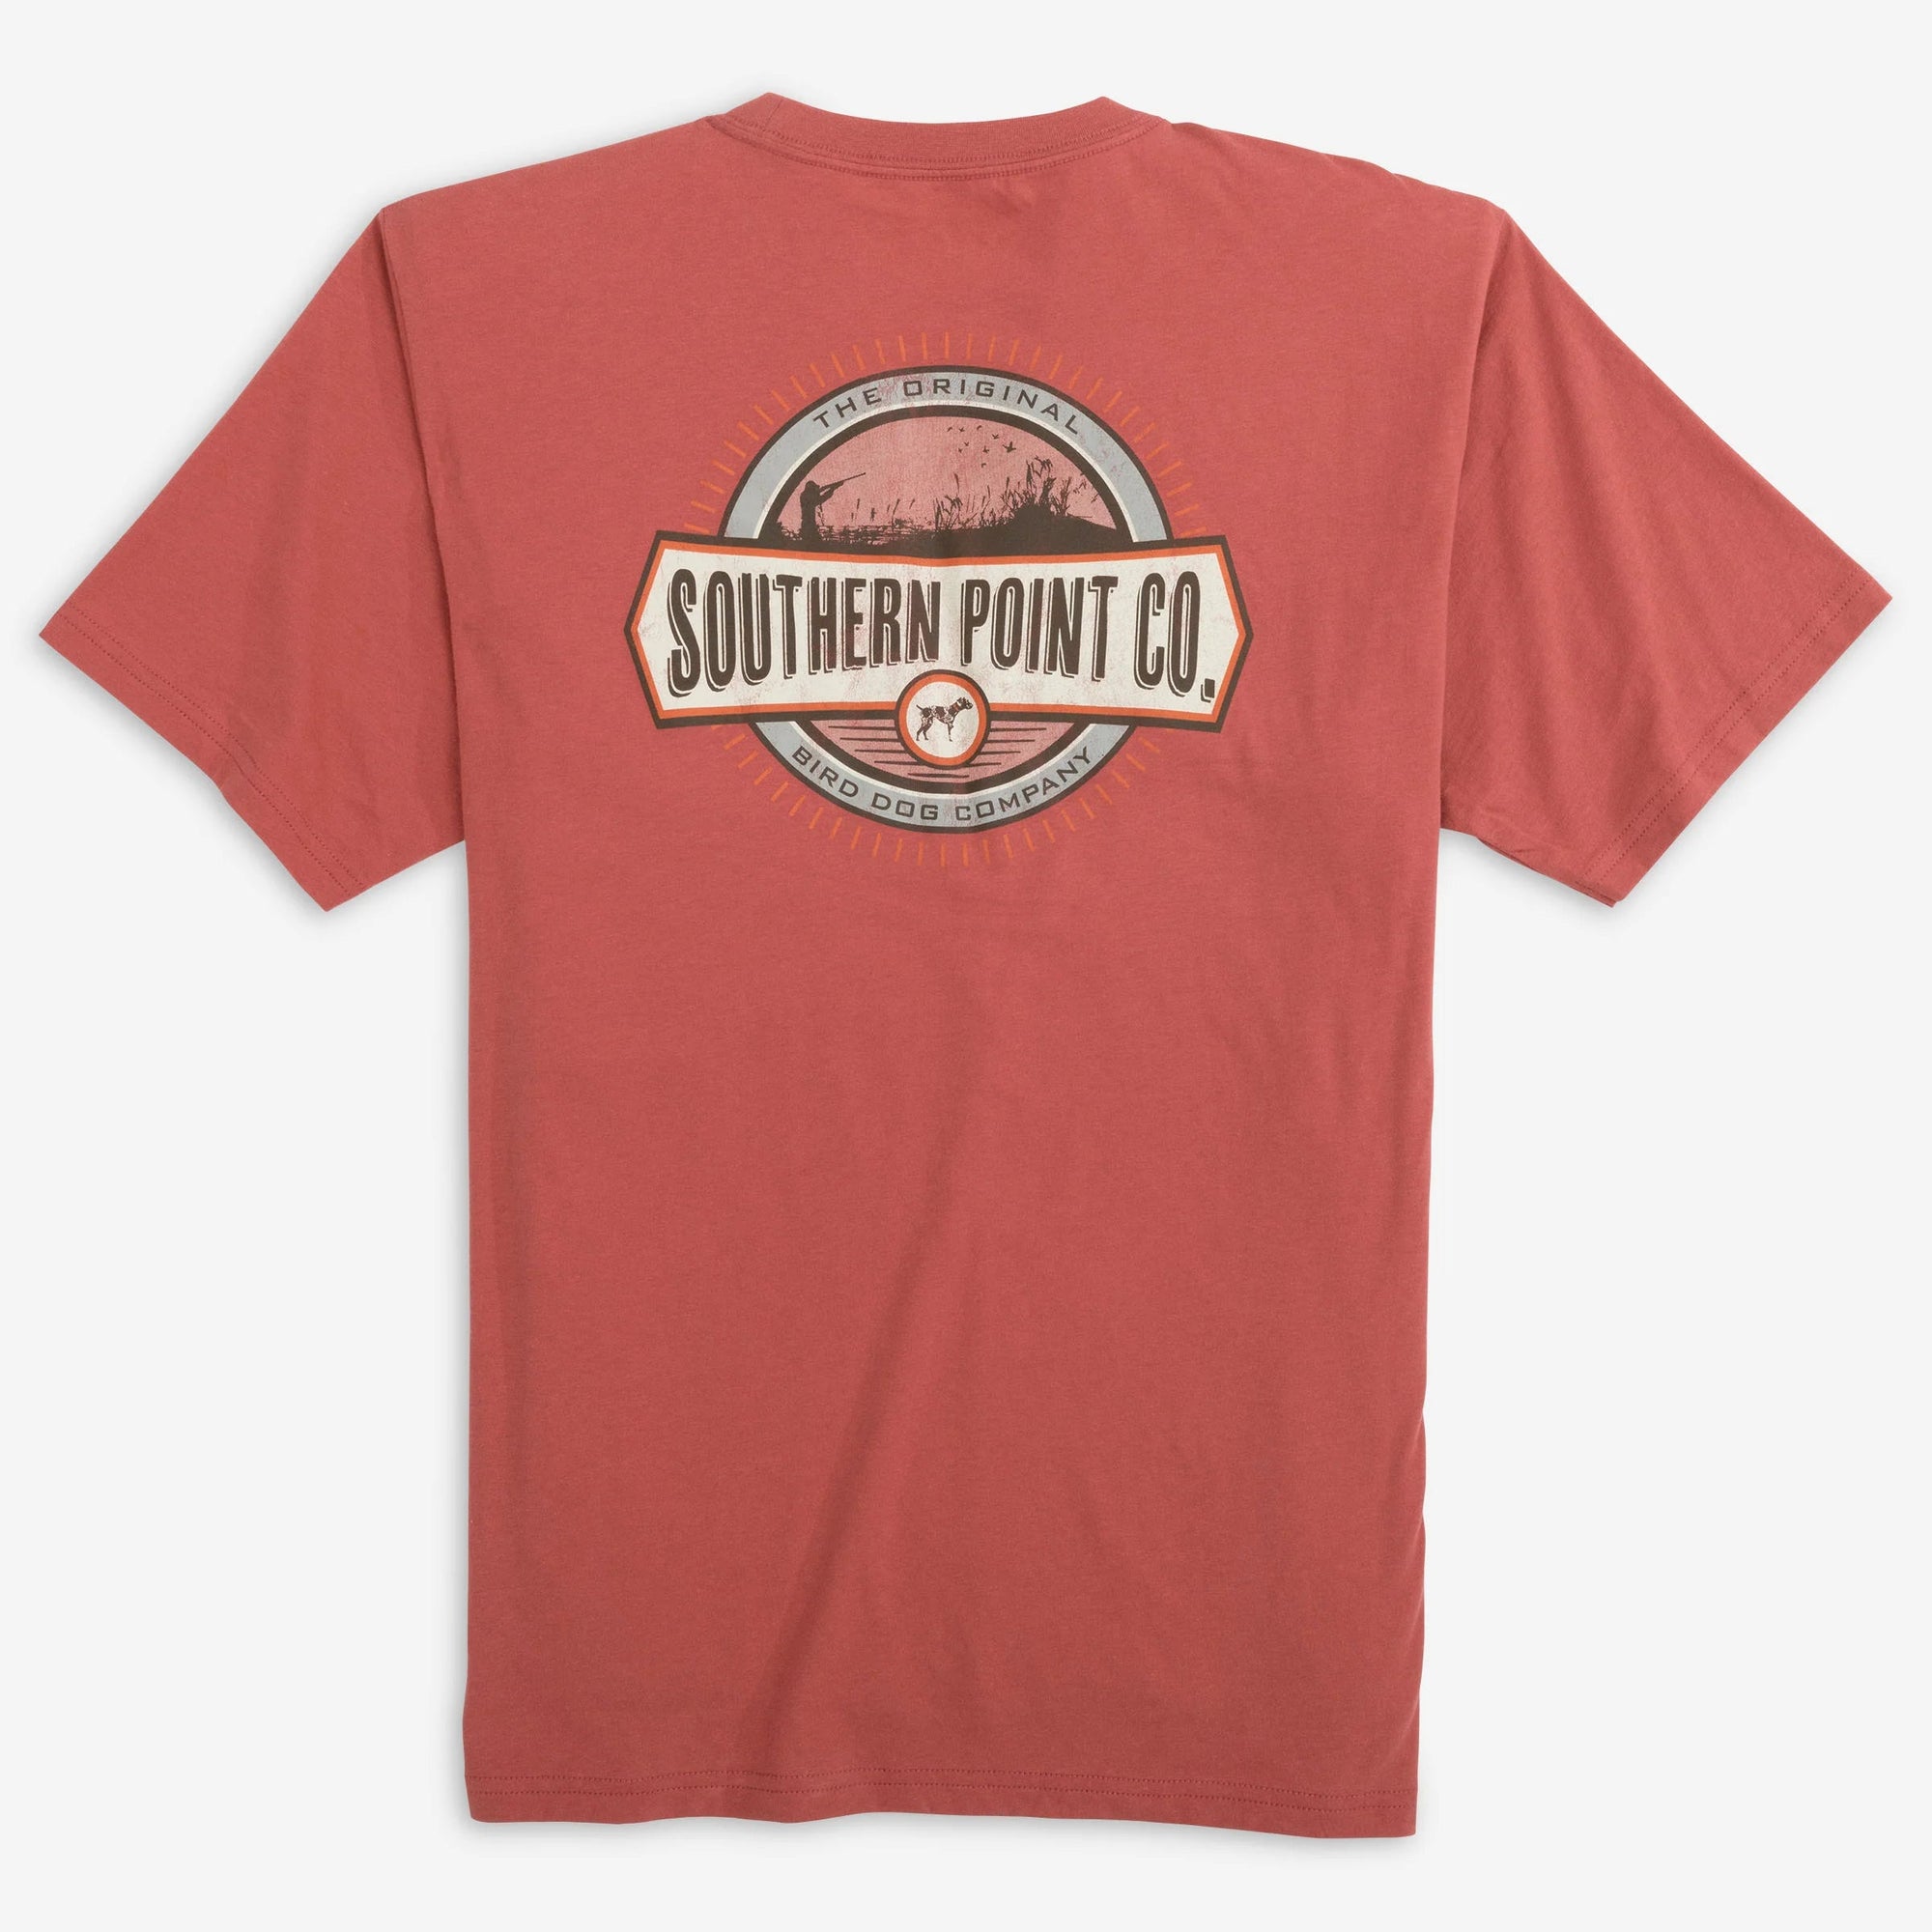 Southern Point Co. Men's Tees Southern Point Original Bird Dog Short Sleeve || David's Clothing